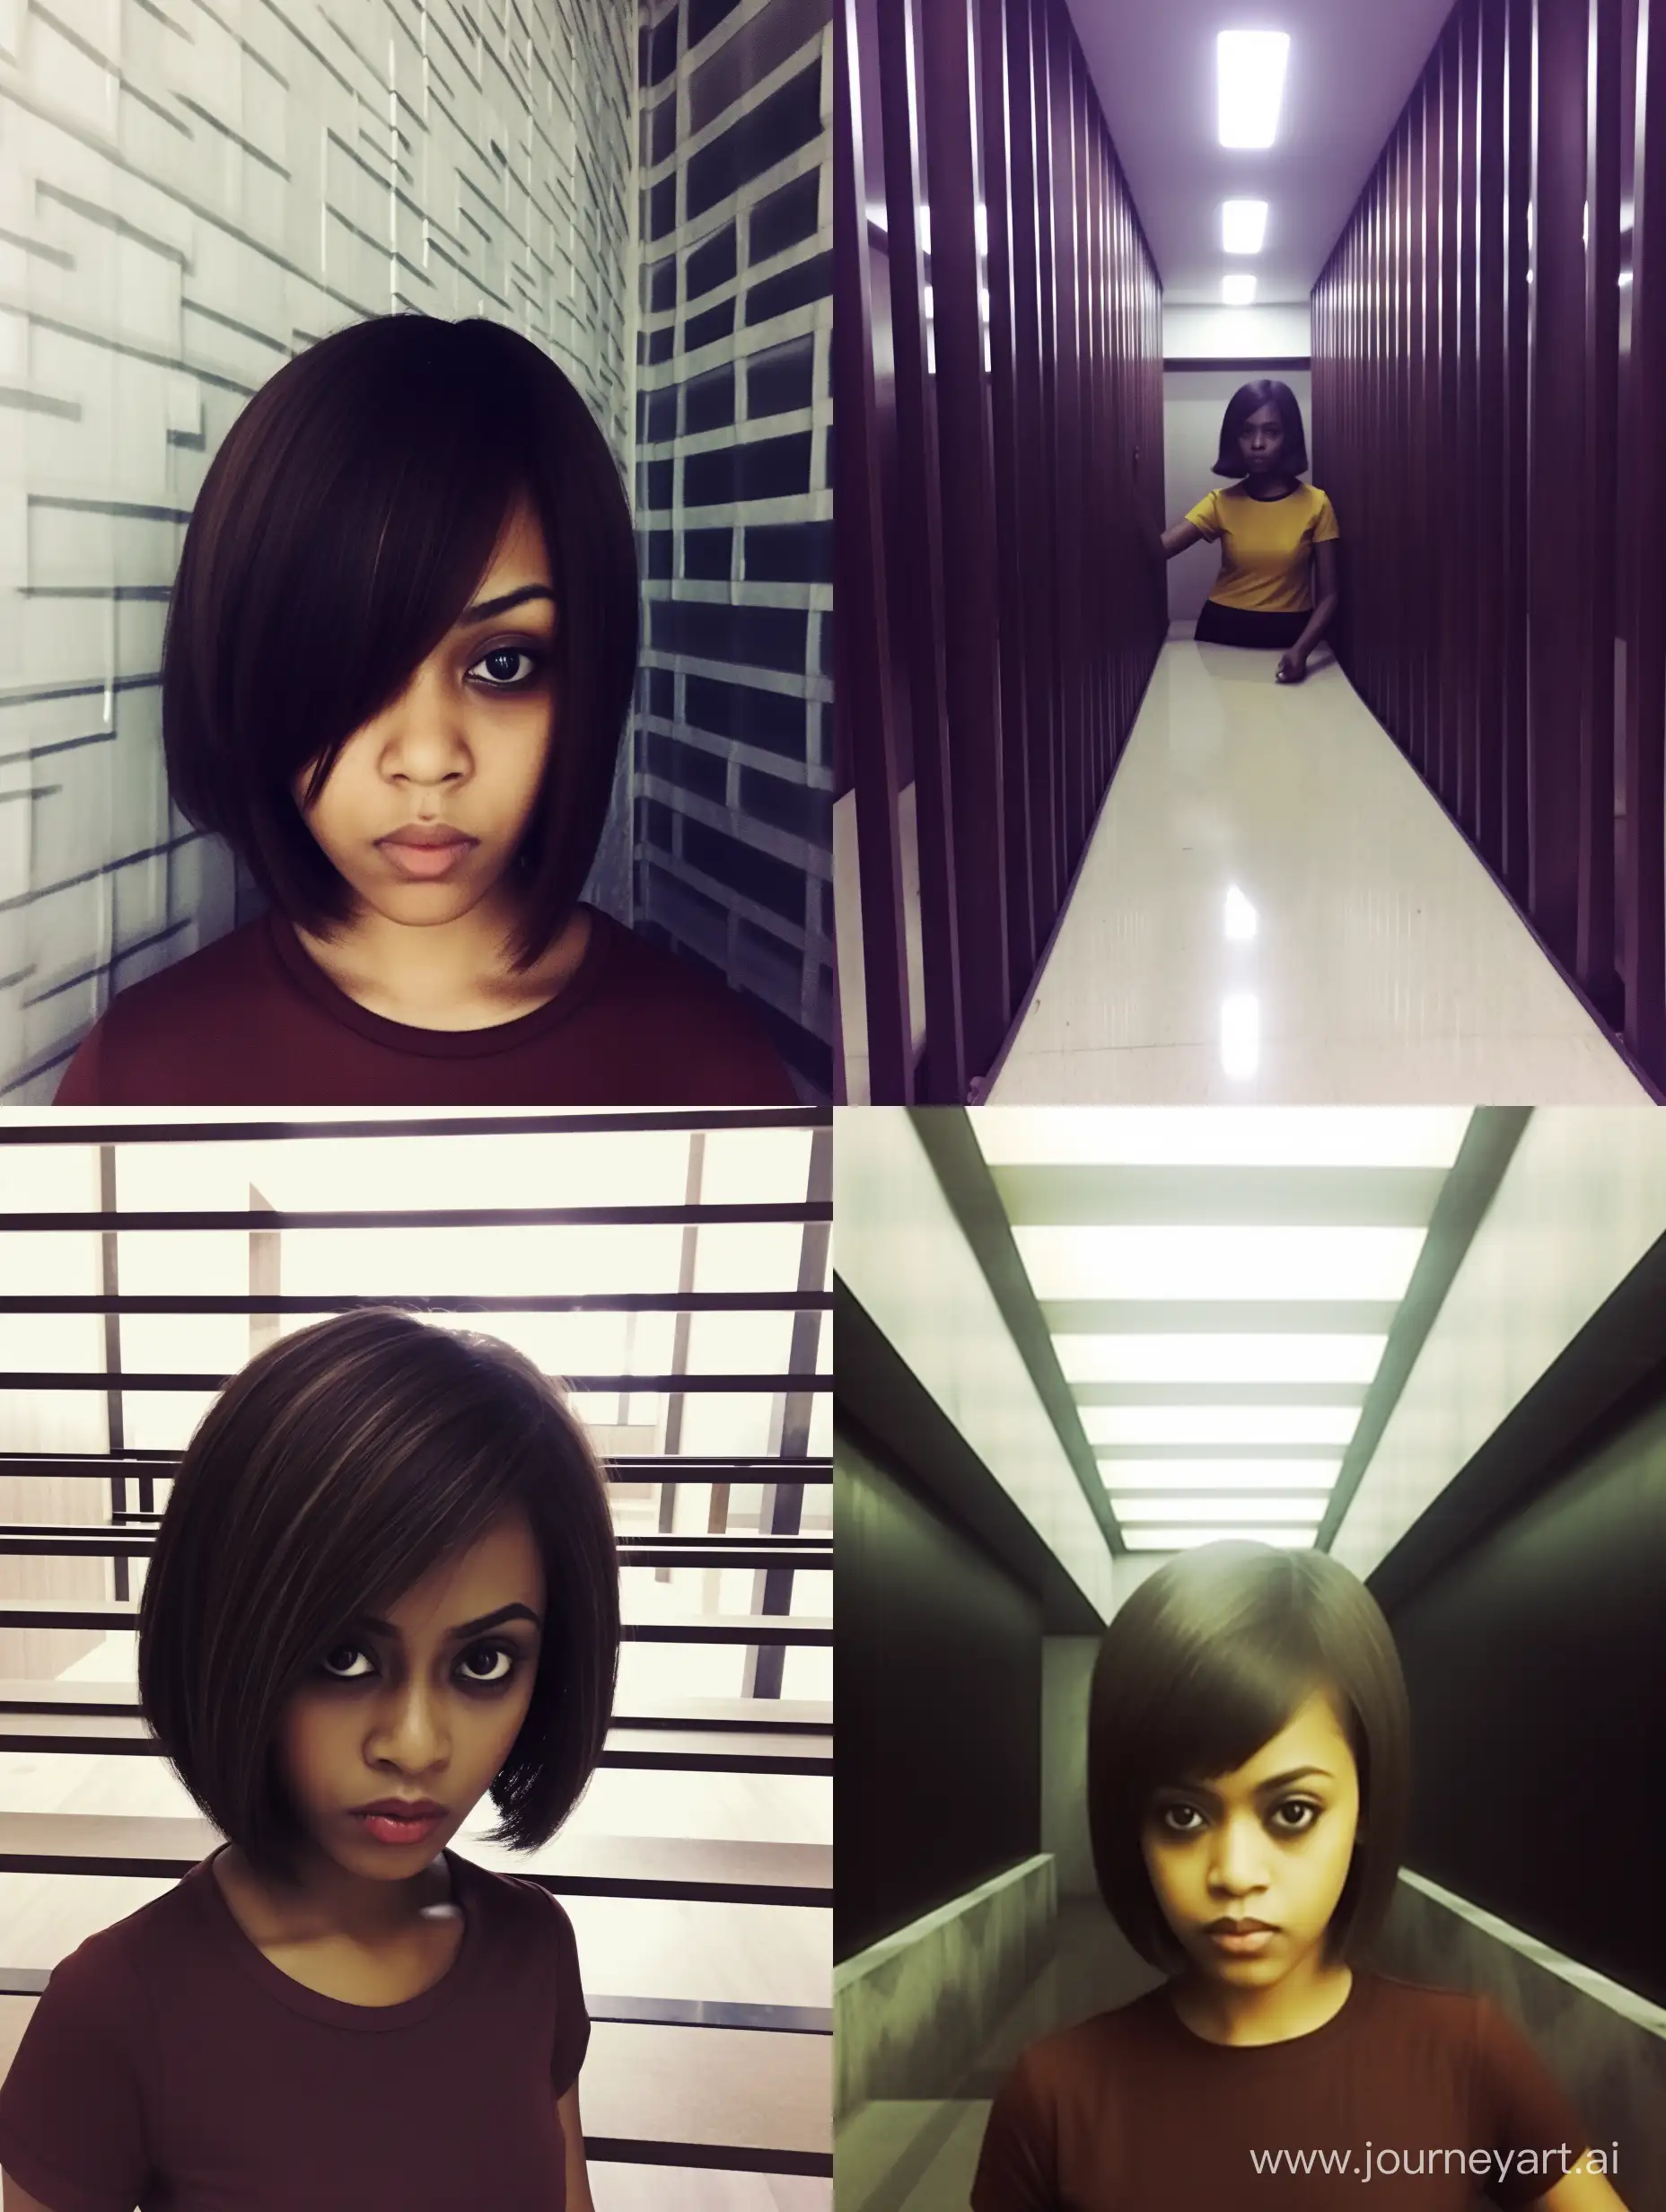 Indonesian-Woman-with-Brown-Bob-Hairstyle-and-Yellowish-Eyes-Selfie-in-LowQuality-Phone-Shot